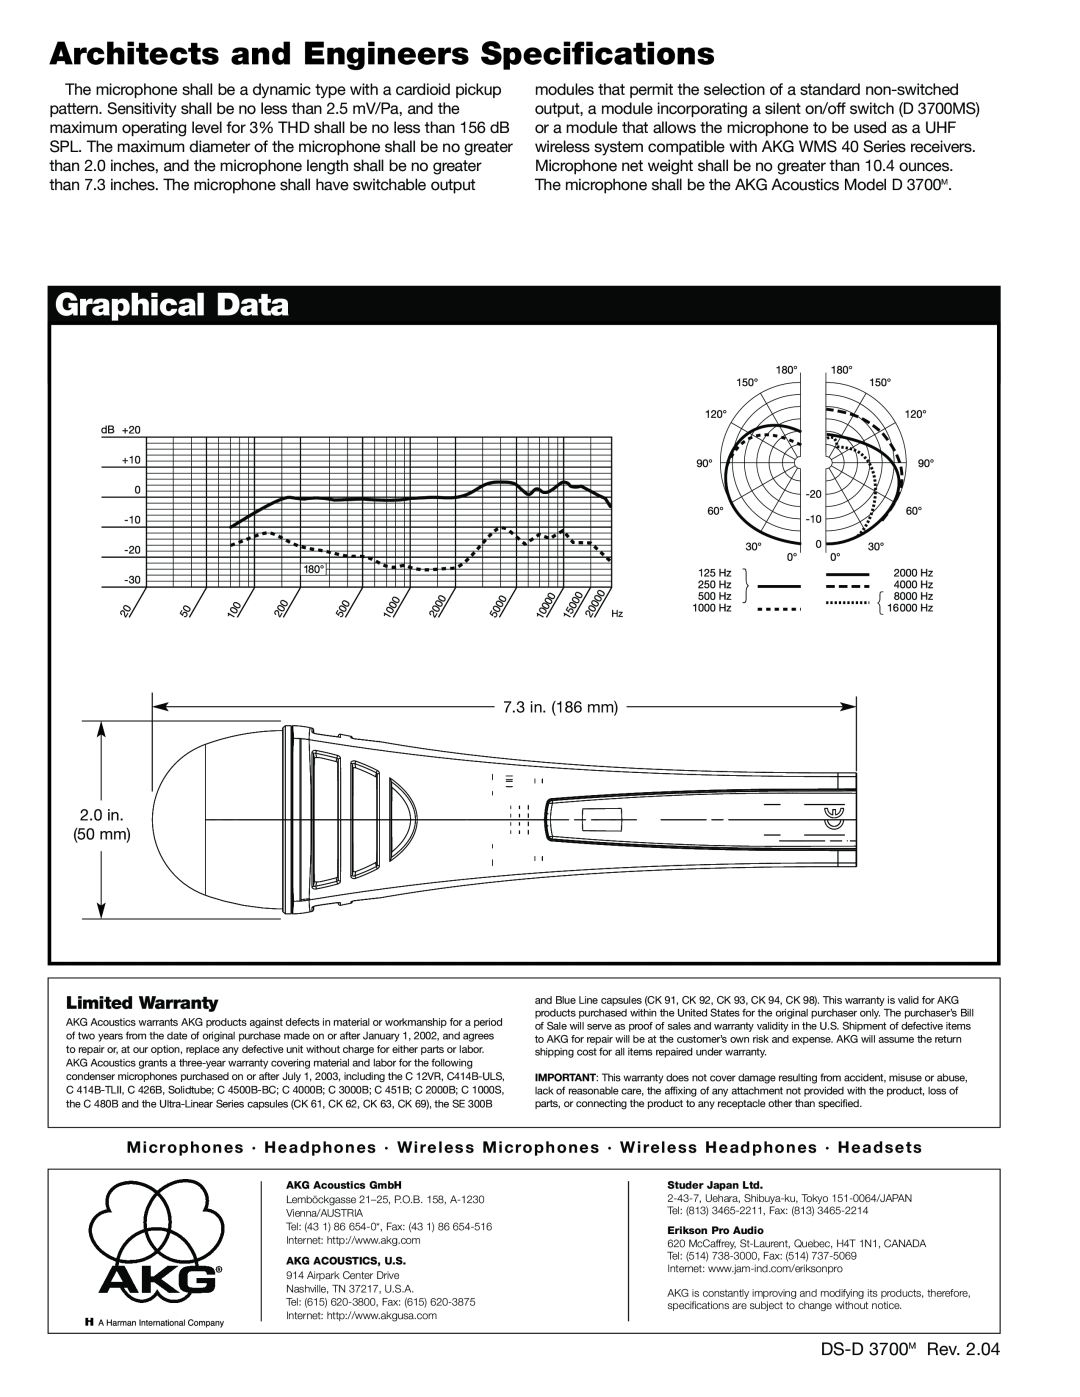 AKG Acoustics Architects and Engineers Specifications, Graphical Data, Limited Warranty, DS-D 3700M Rev, 7.3 in. 186 mm 